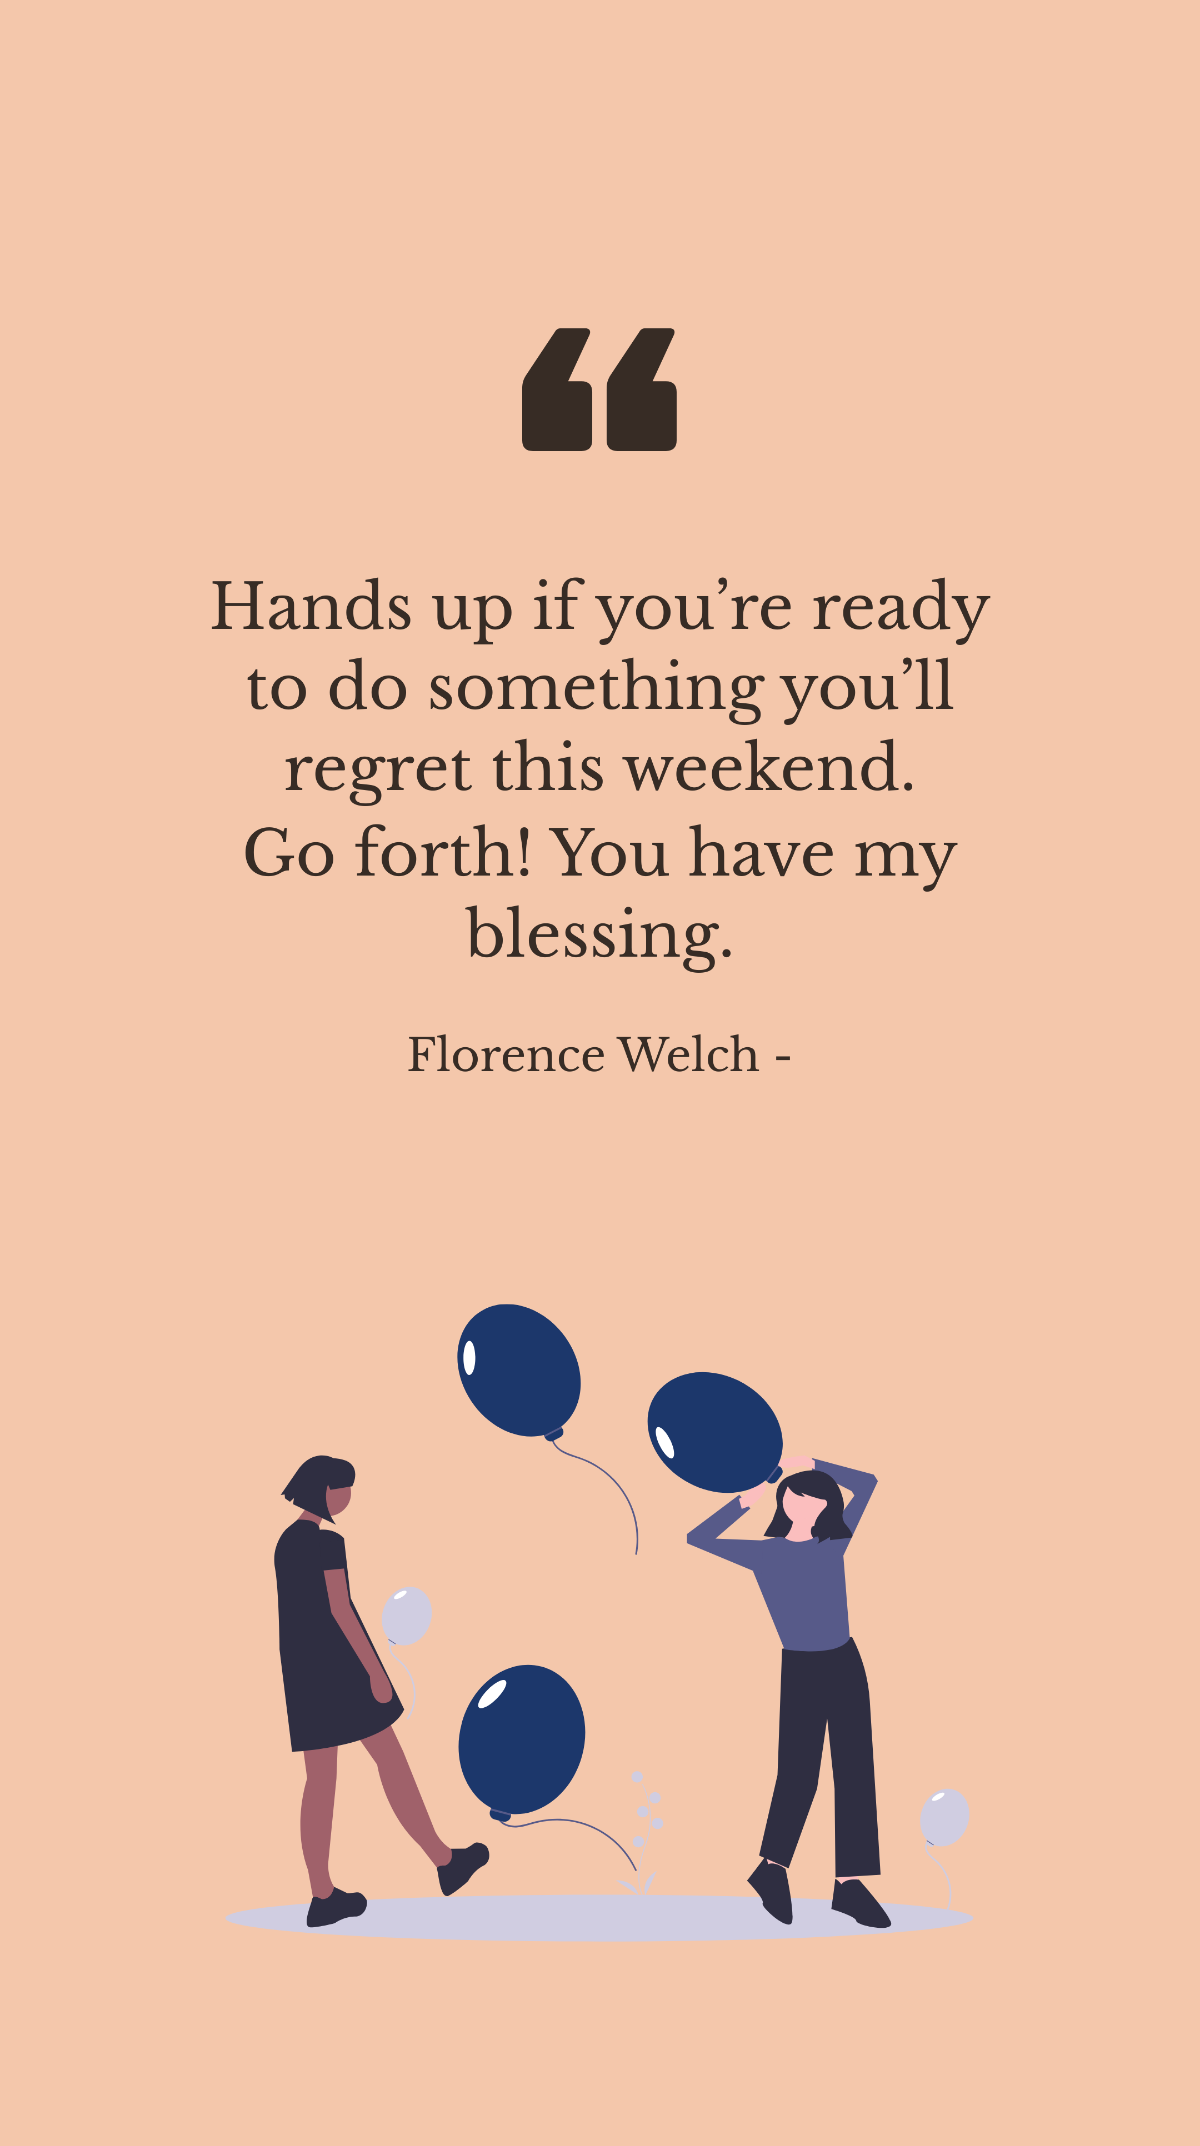 Florence Welch - Hands up if you’re ready to do something you’ll regret this weekend. Go forth! You have my blessing. Template